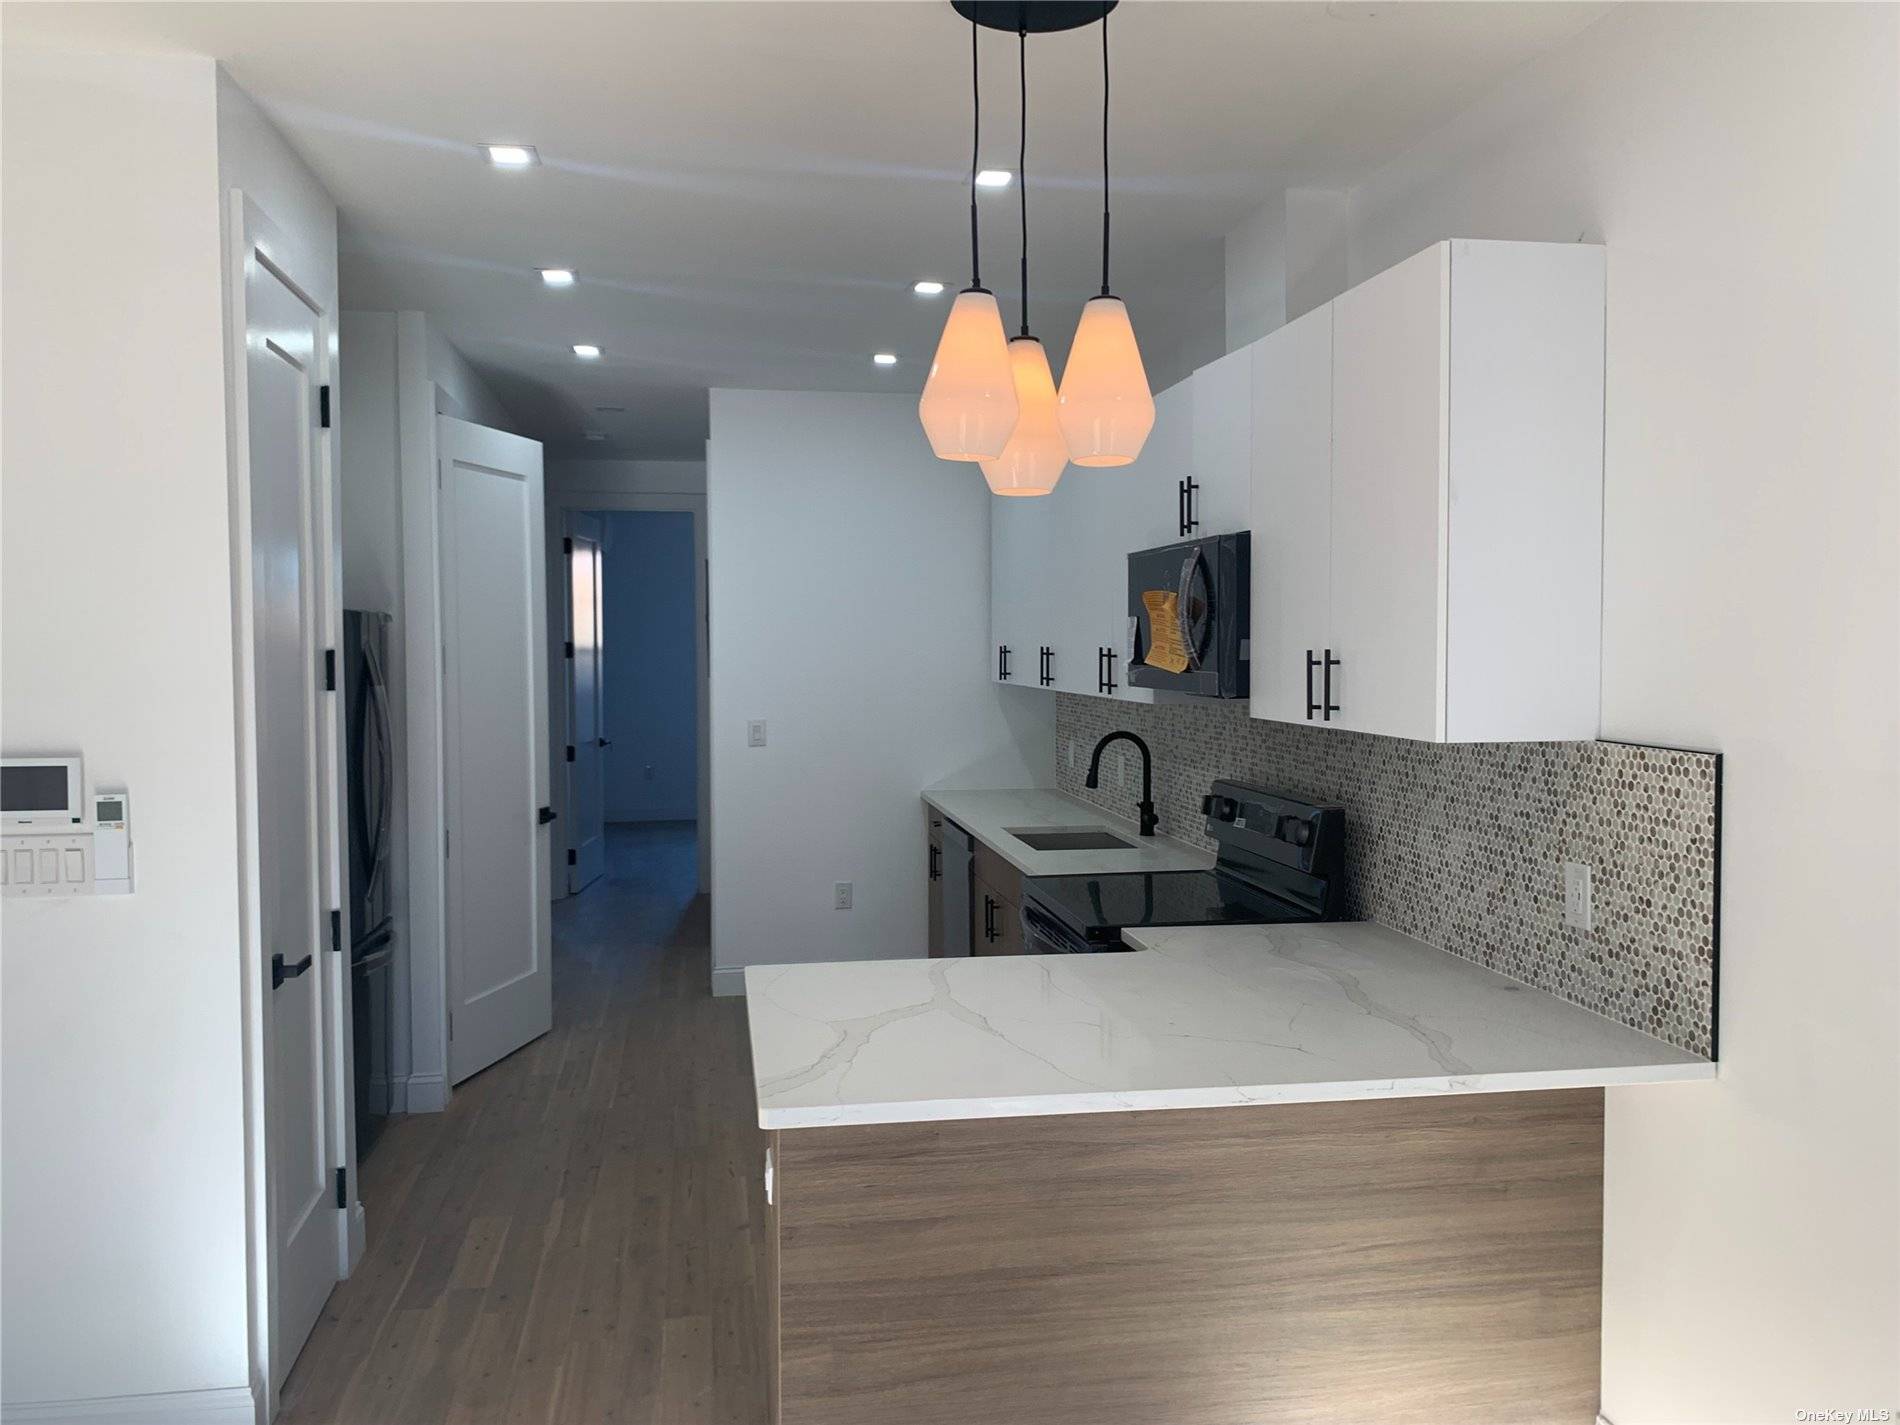 NEWLY RENOVATED THREE BEDROOM, TWO FULL BATHROOM, OPEN PLAN KITCHEN WITH GRANITE COUNTER TOP, BRAND NEW STAINLESS STEEL APPLIANCES, IN APARTMENT WASHER AND DRYER